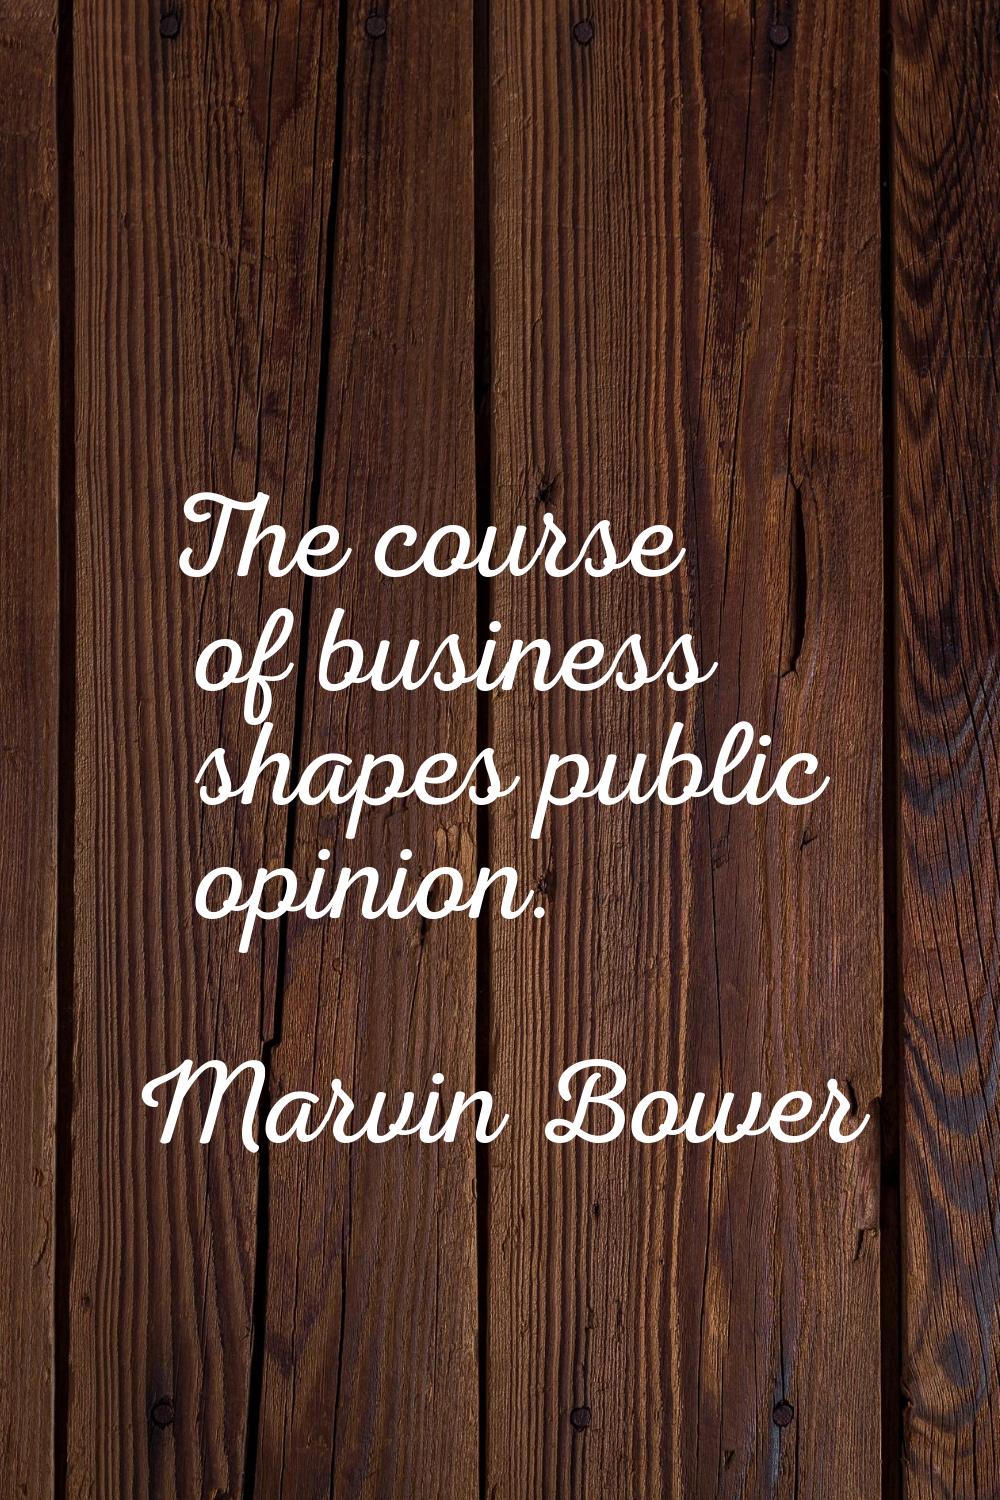 The course of business shapes public opinion.